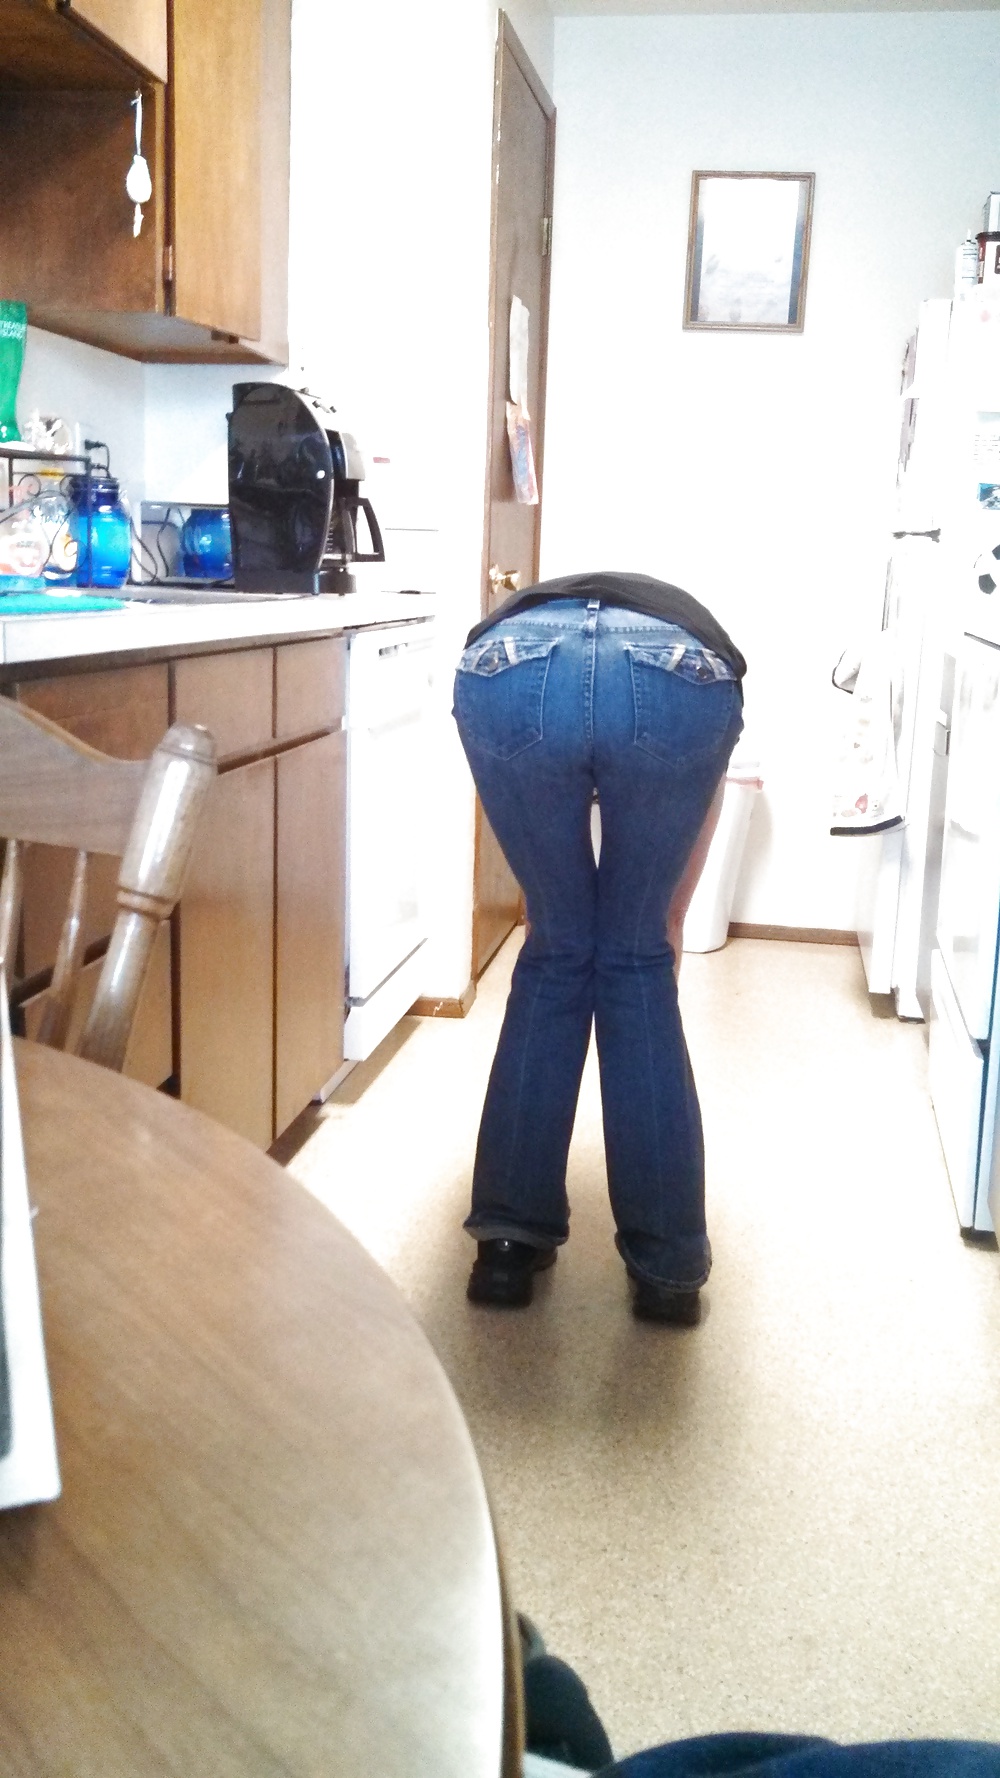 My hot as hell wife in tight ass jeans. #26722164